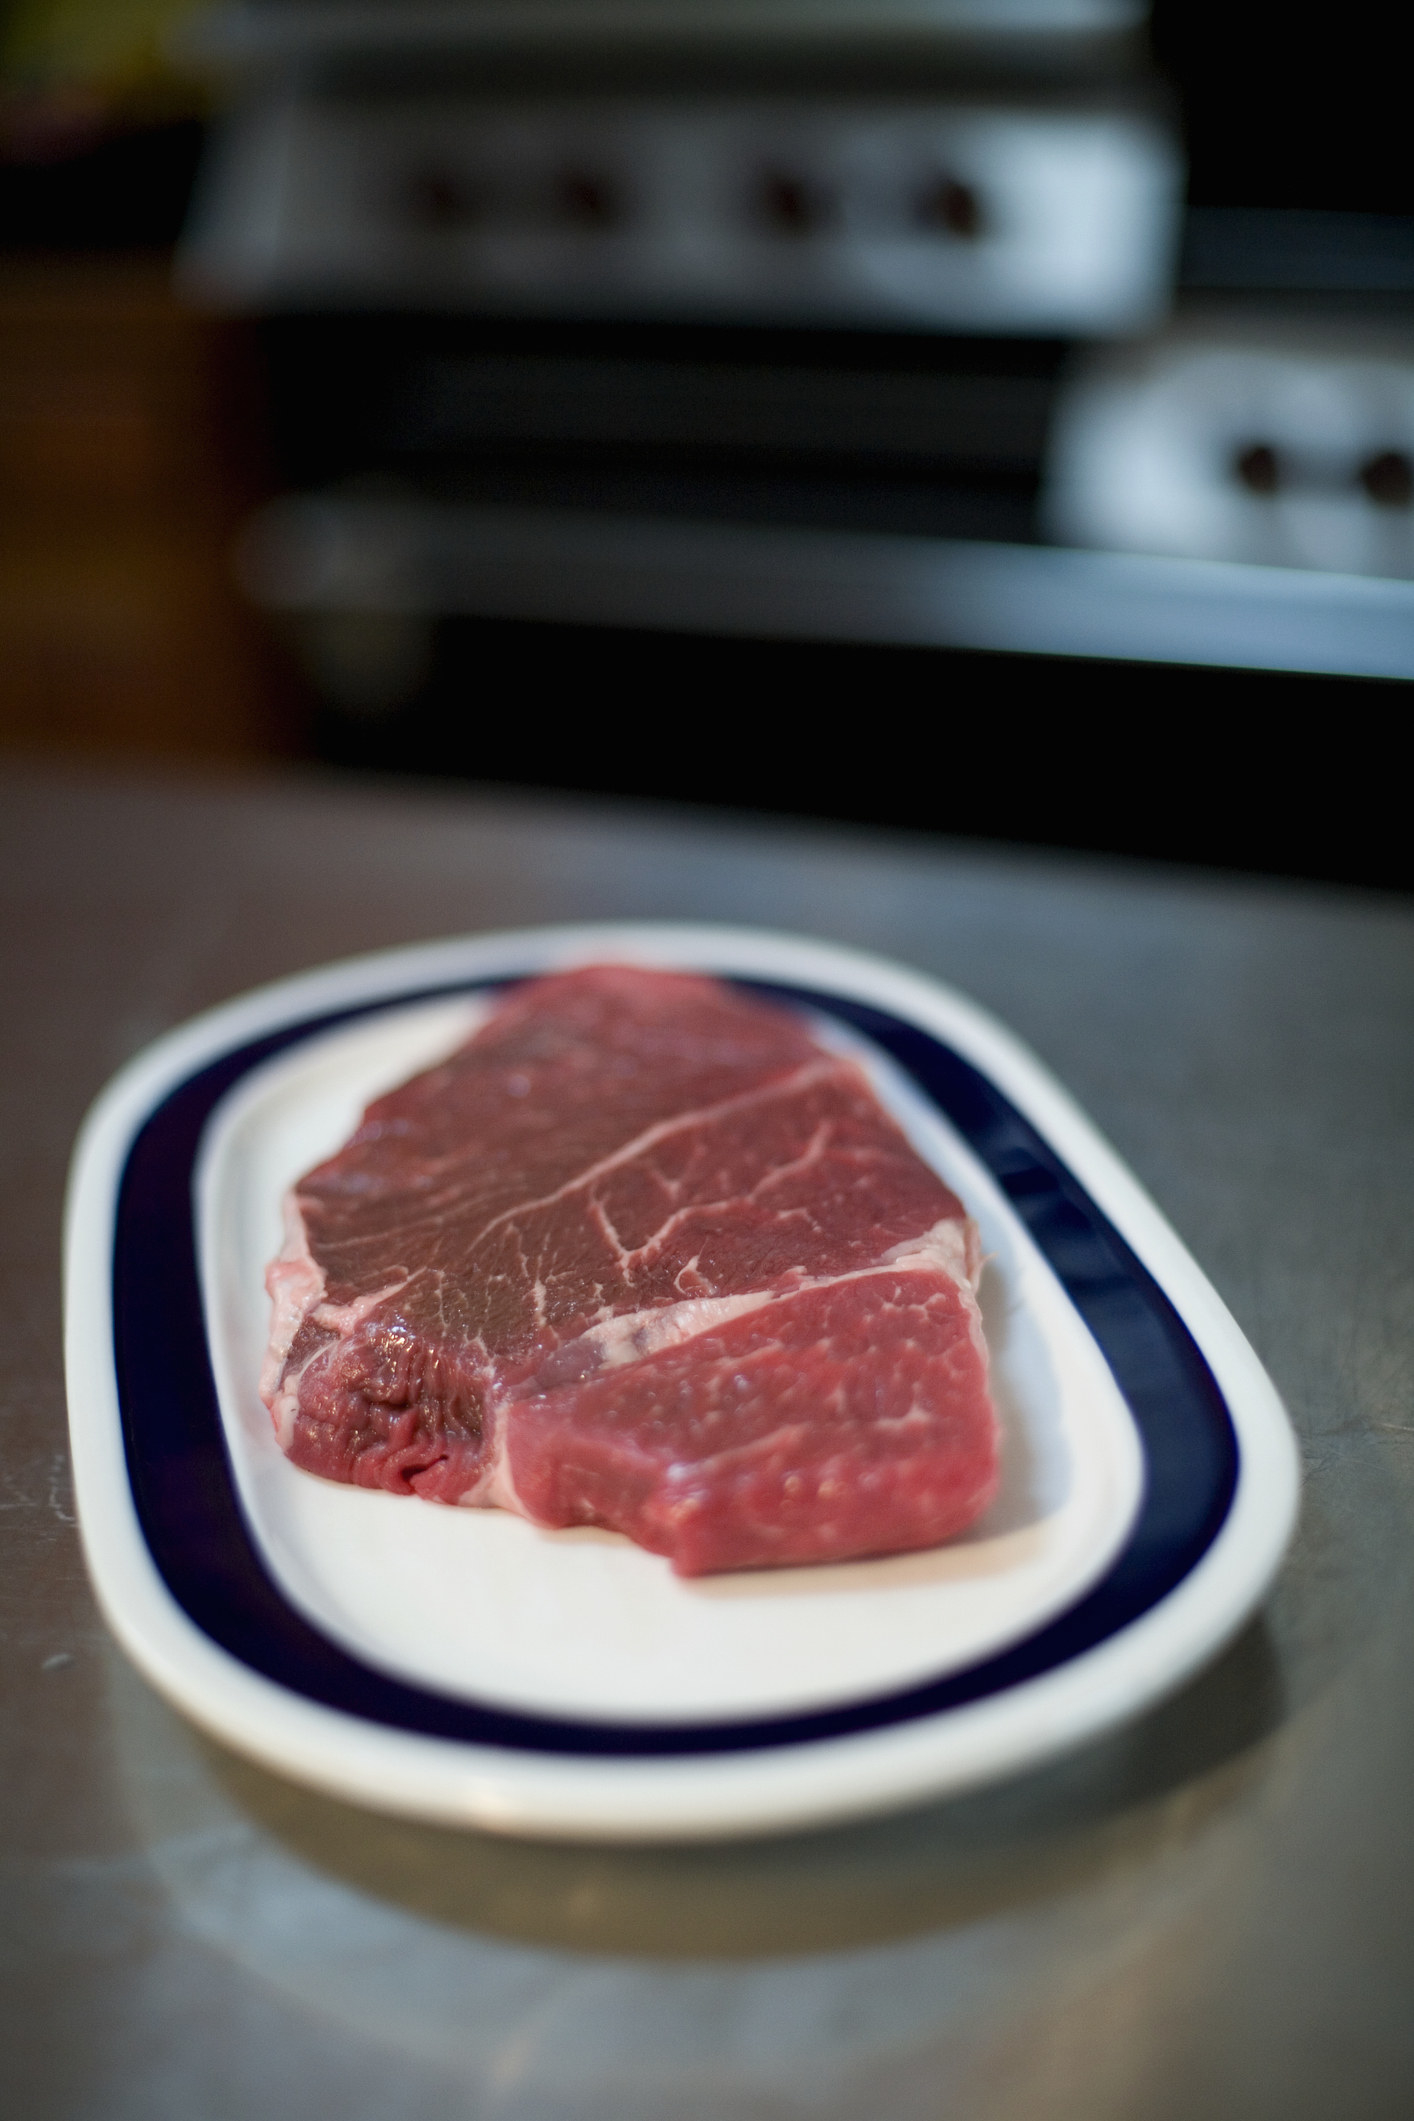 Steaks on a plate in the kitchen.